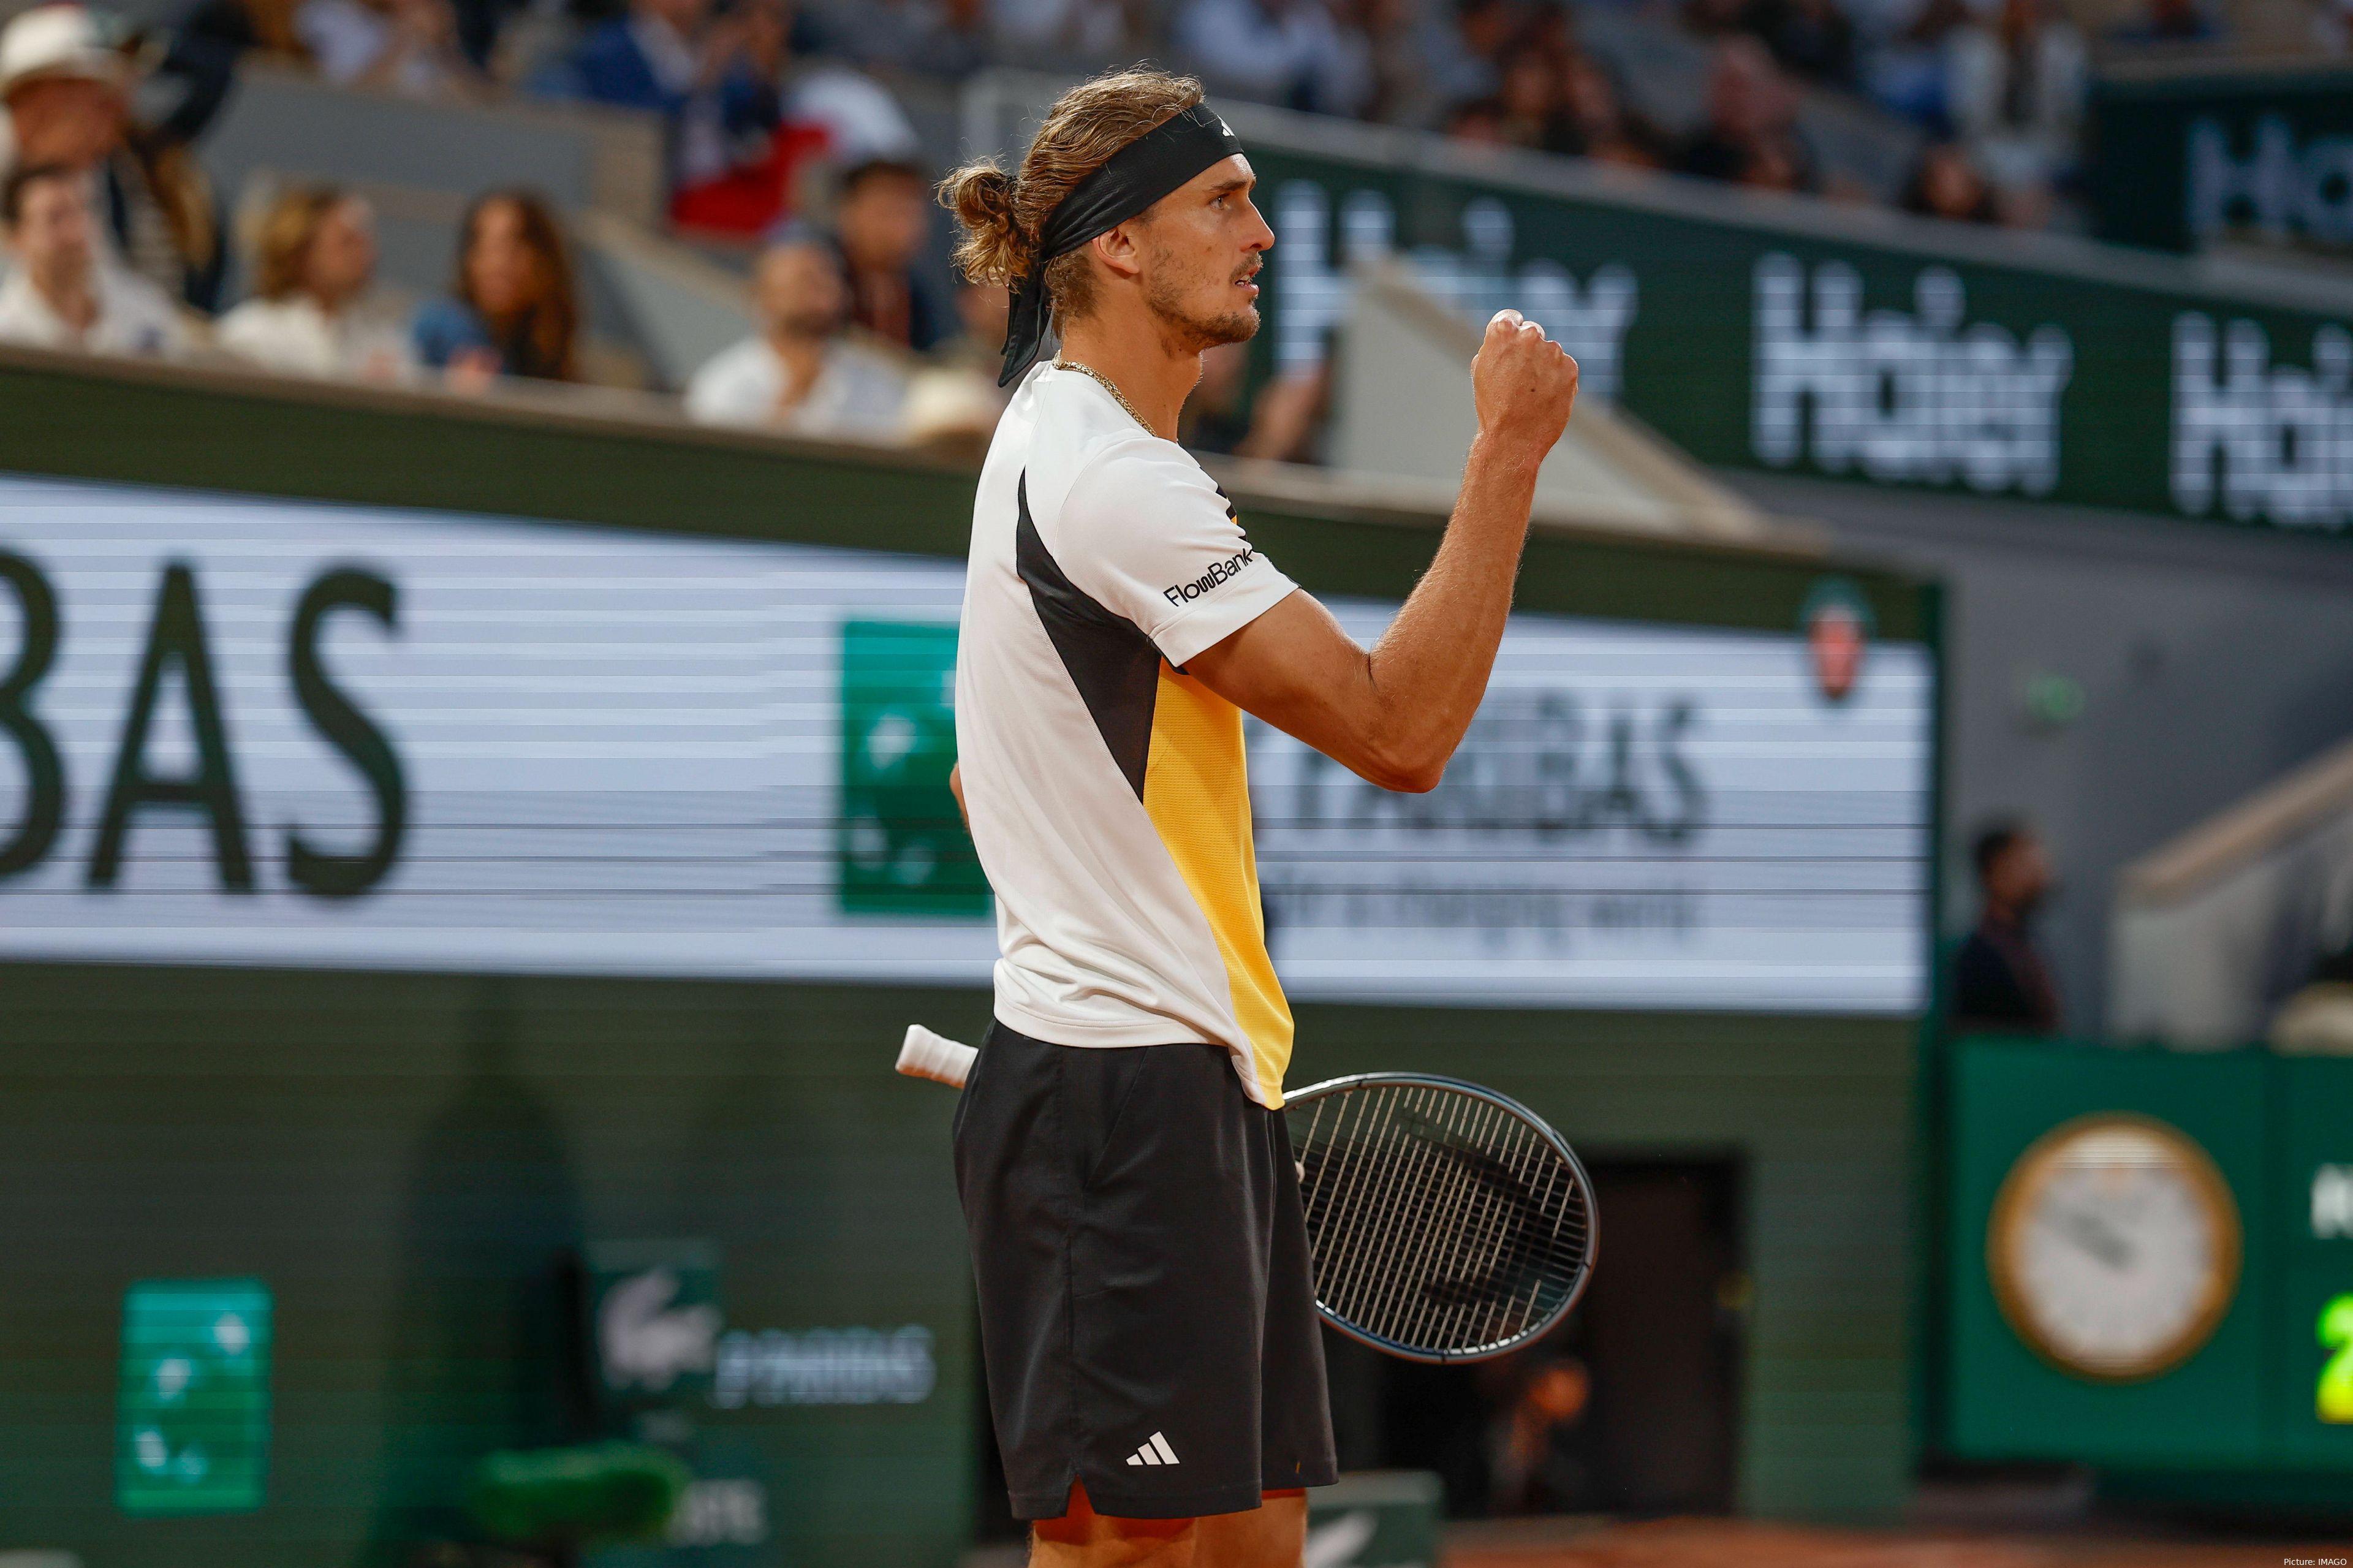 Alexander Zverev has dealt with a trial both by public opinion and in a Berlin court but won both thus far.